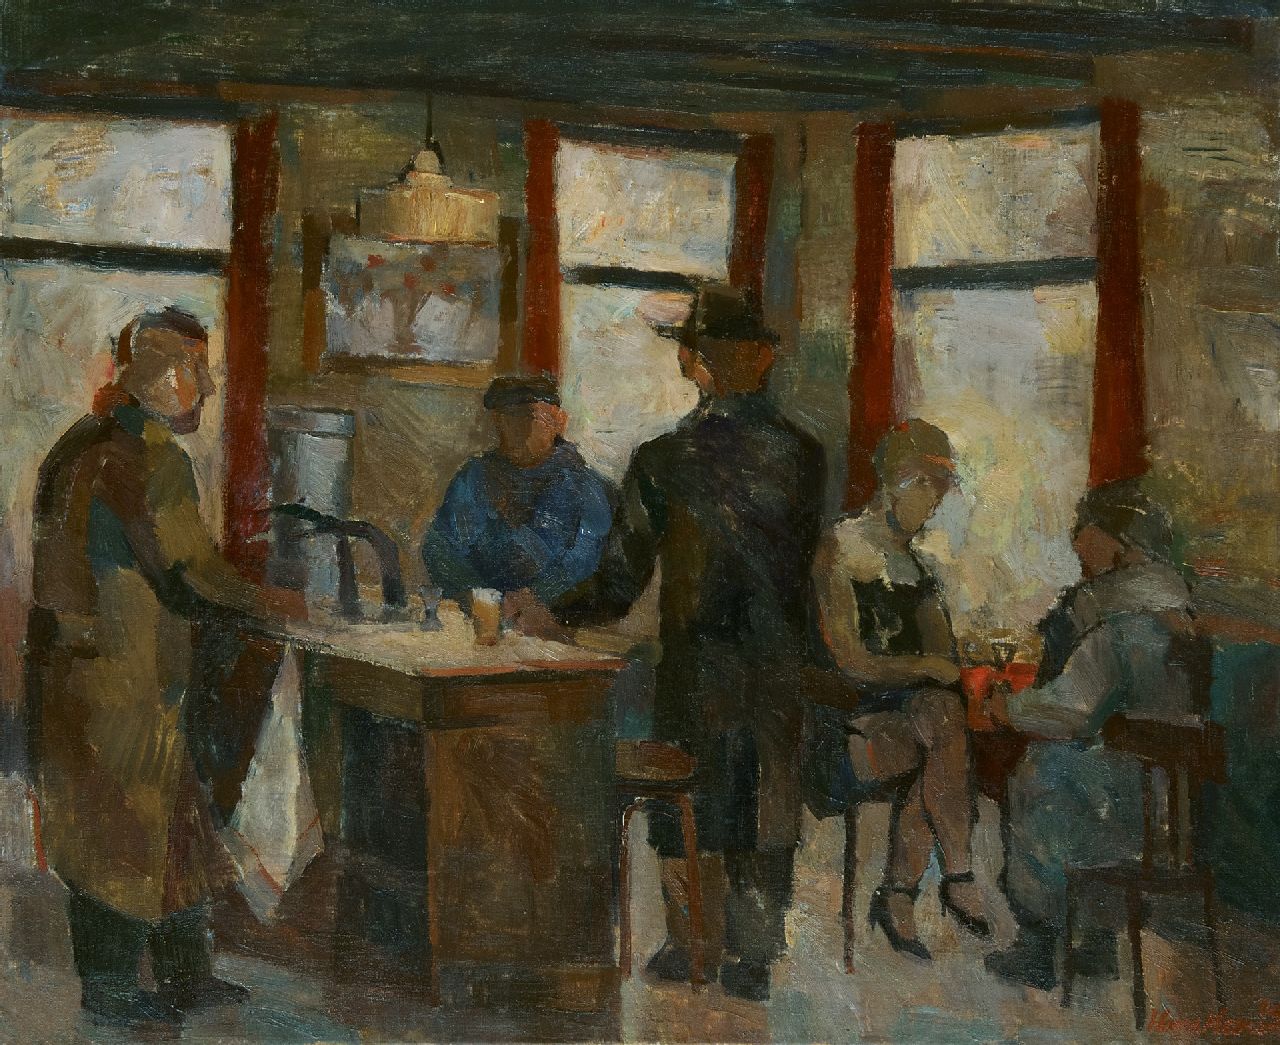 Heeren J.H.P.G.  | Johannes Petrus George 'Hans' Heeren | Paintings offered for sale | Café interior in Middelburg, oil on canvas 100.0 x 120.5 cm, signed l.r. and dated  '69